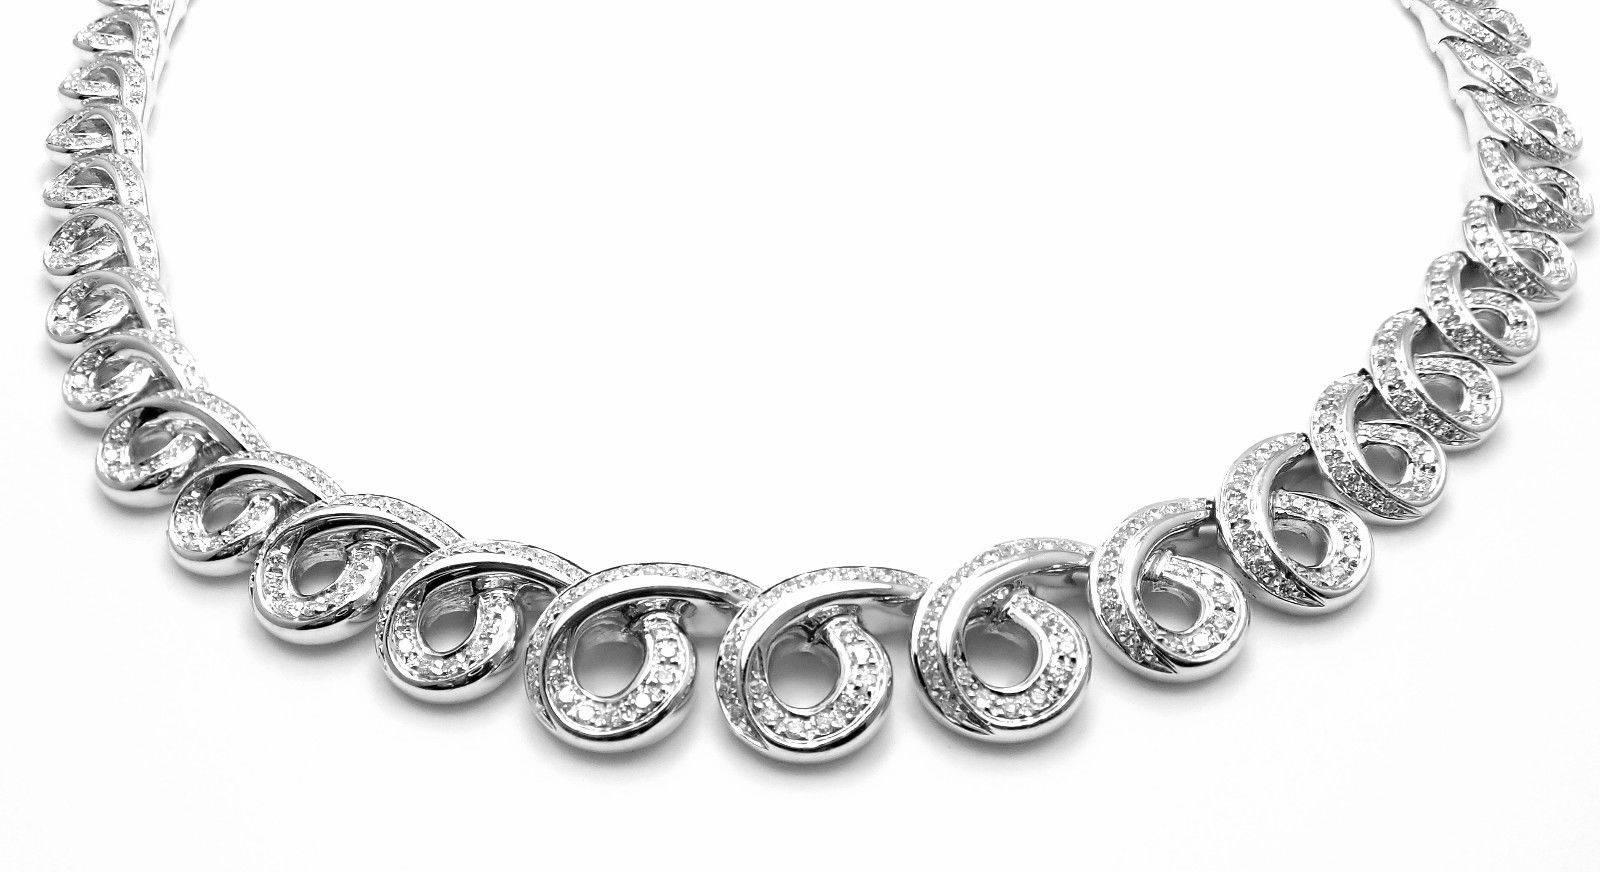 18k White Gold 8ctw Diamond Necklace by Damiani. 
With 500 round brilliant cut diamond E-G color, VS-SI clarity total weight approx. 8ct  
This necklace comes with Box, Certificate.  
Details: 
Measurements: 
Length: 16.5